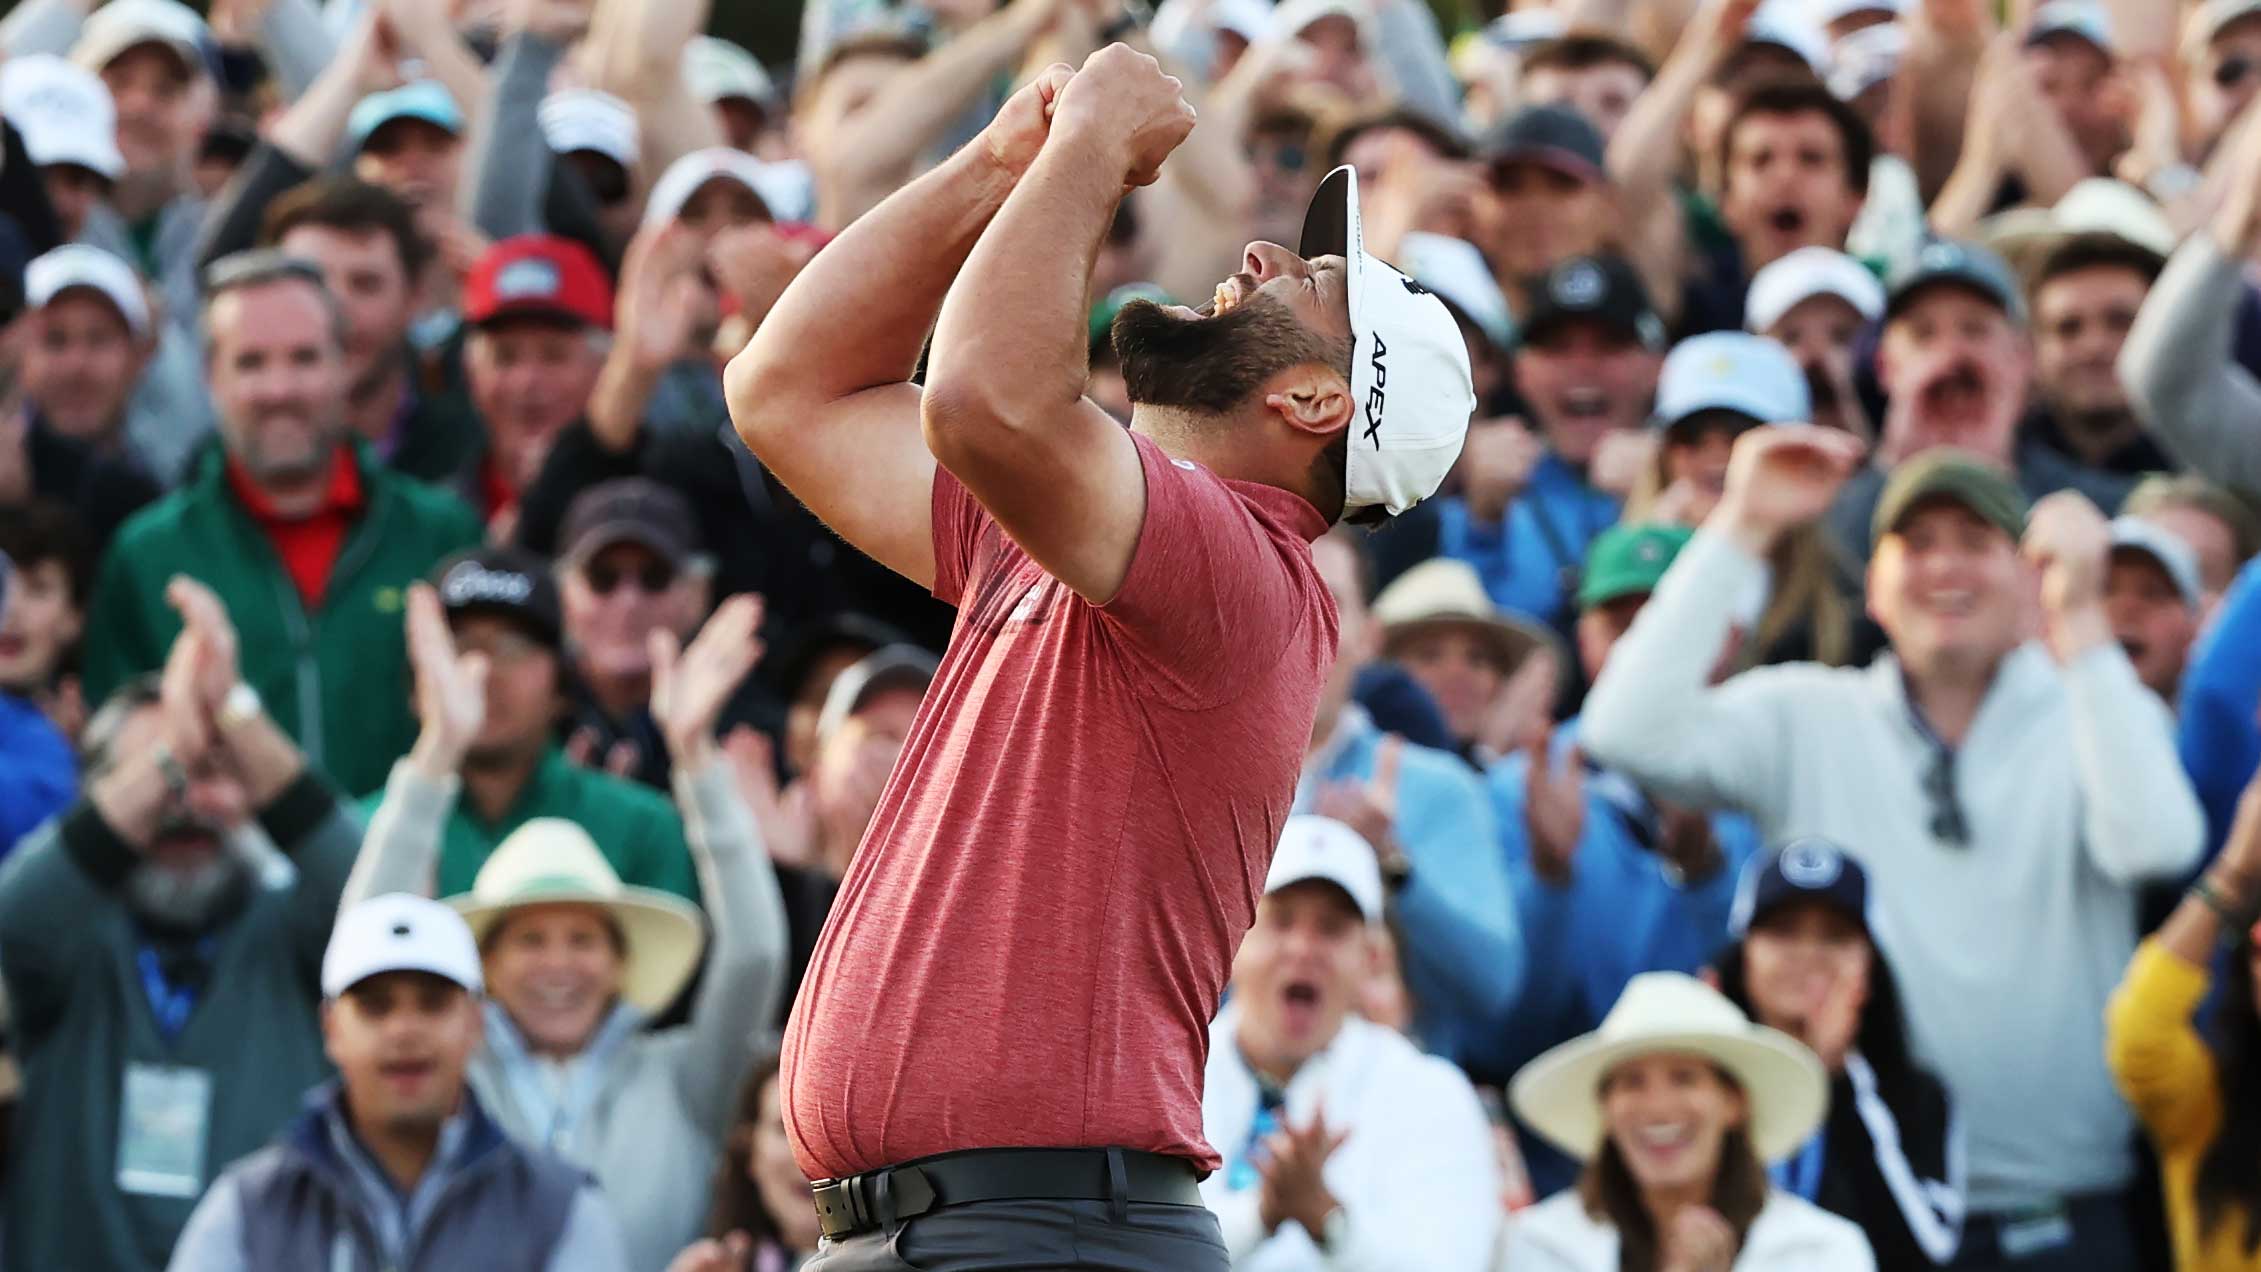 Jon Rahm storms back to win the Masters and claim second major title